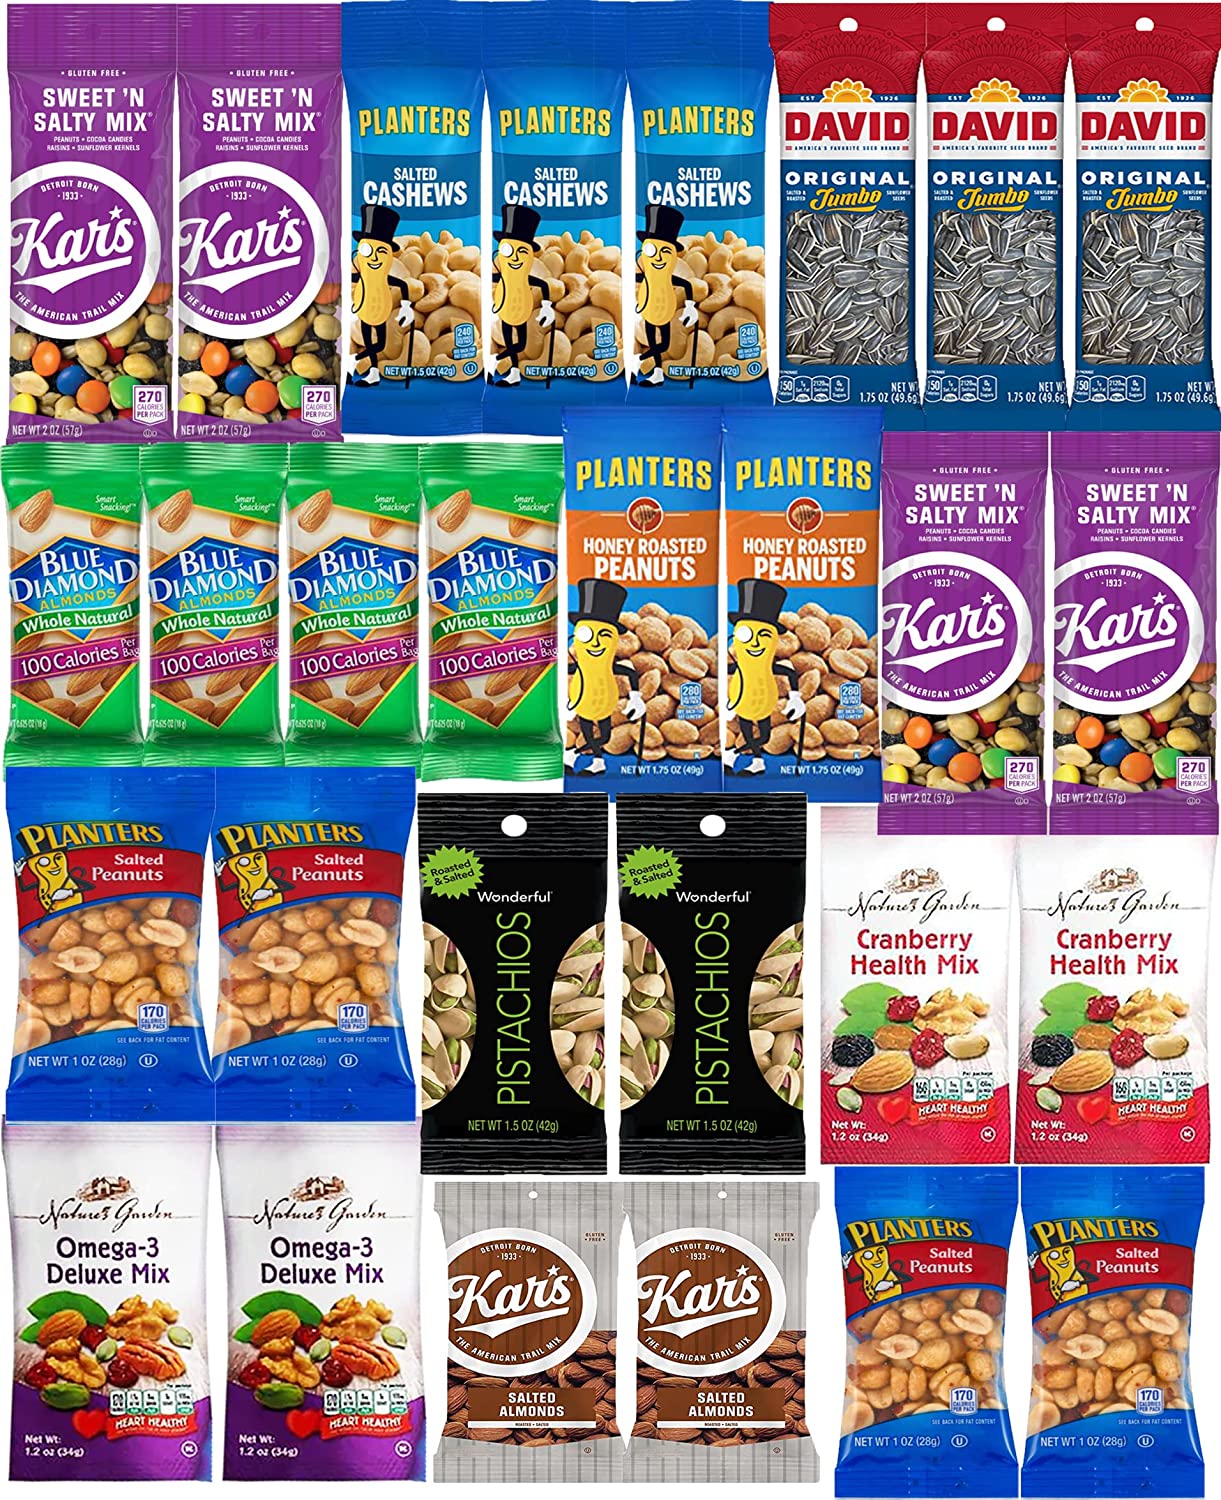 Nuts Snack Packs – Mixed Nuts and Trail Mix Individual Packs – Healthy Snacks Care Package (28 Count)